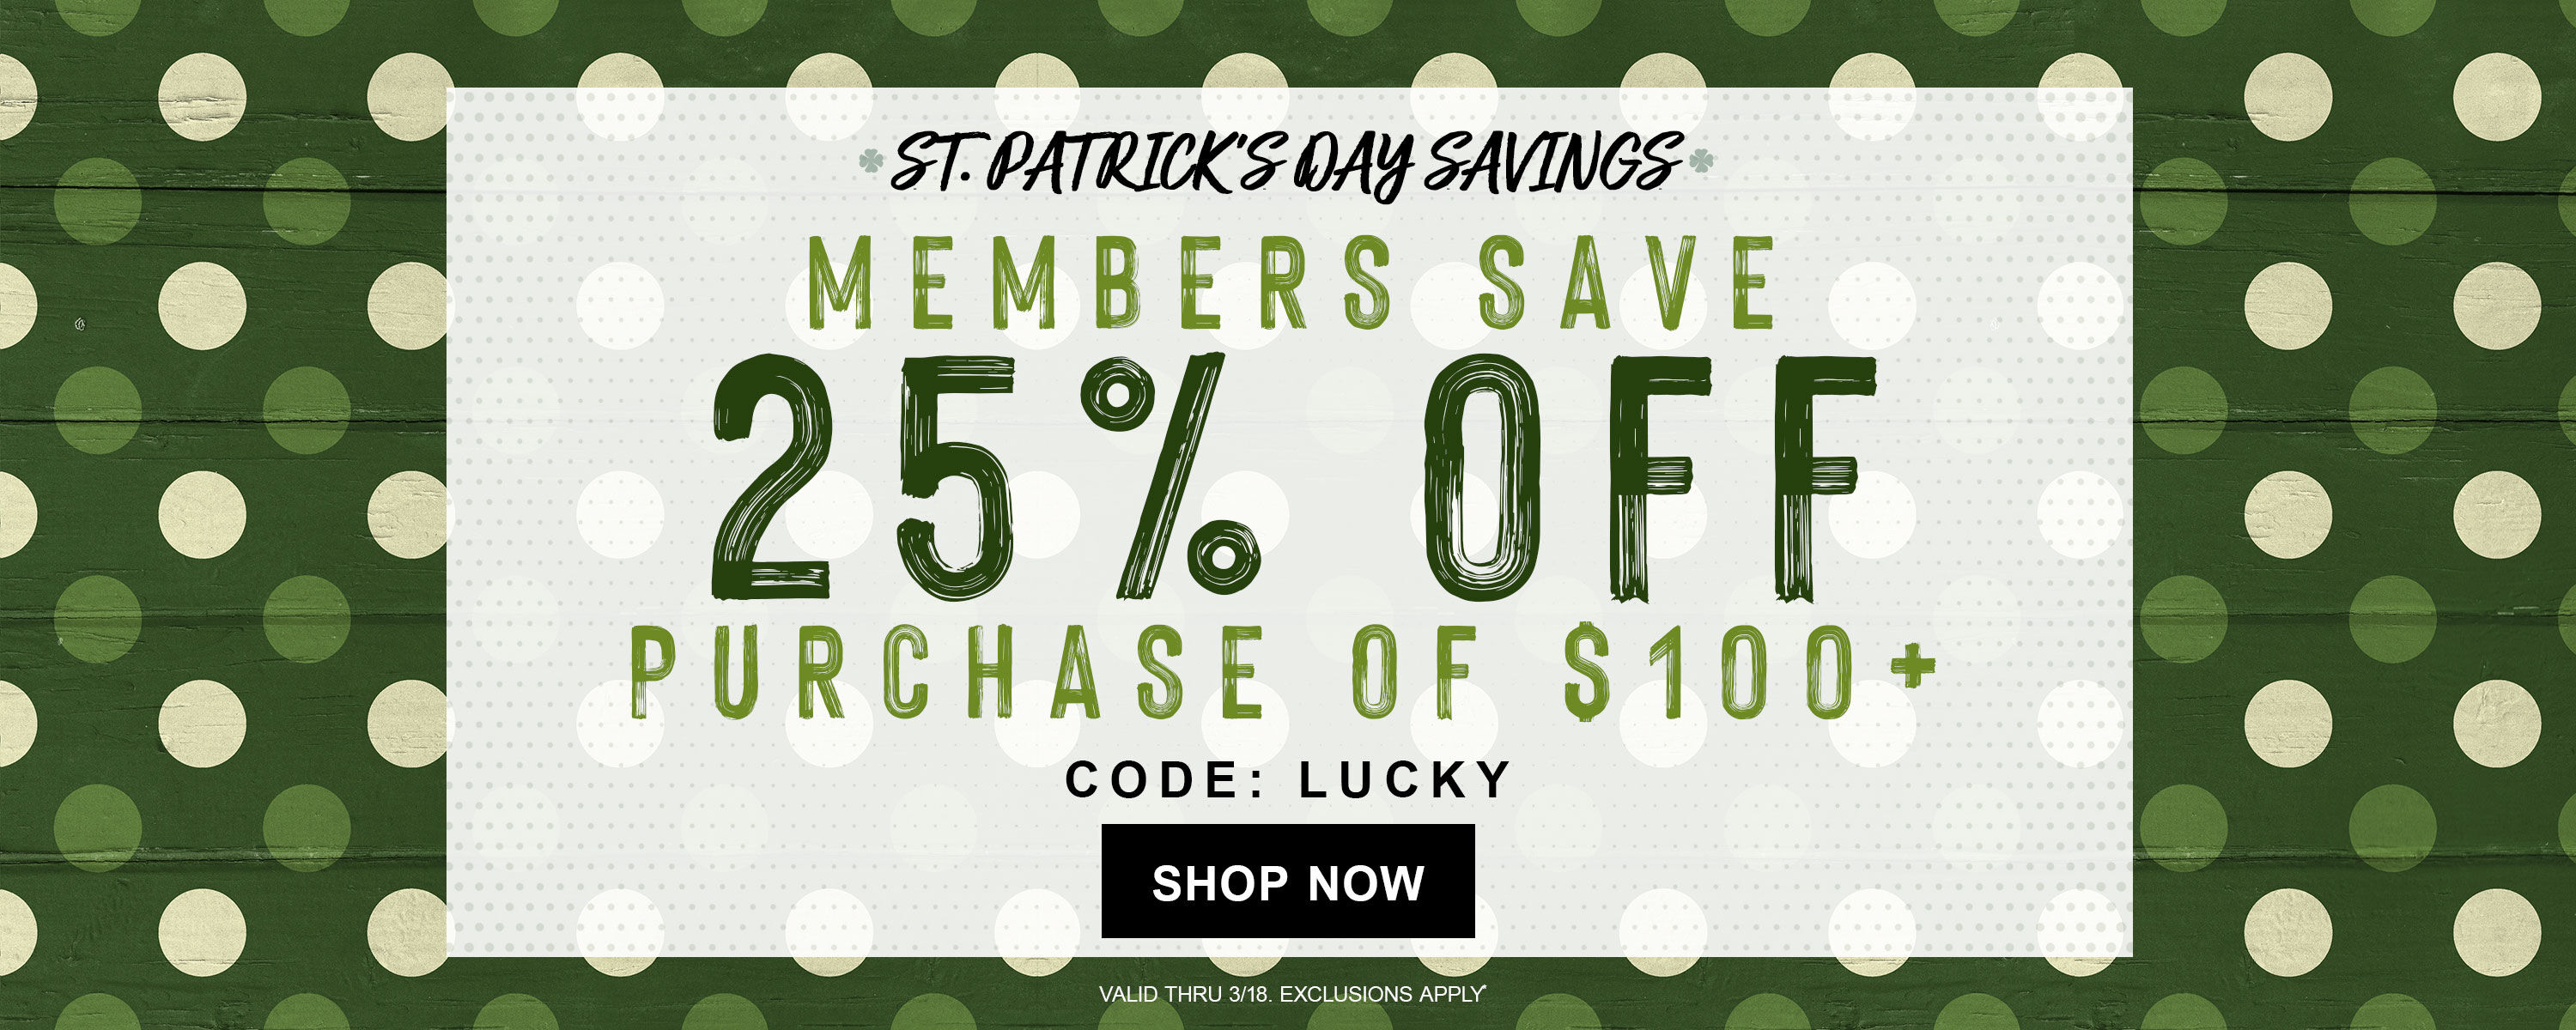 St. Patrick's Day Savings! Members save 25% off purchases of $100+ with code: LUCKY ~ SHOP NOW